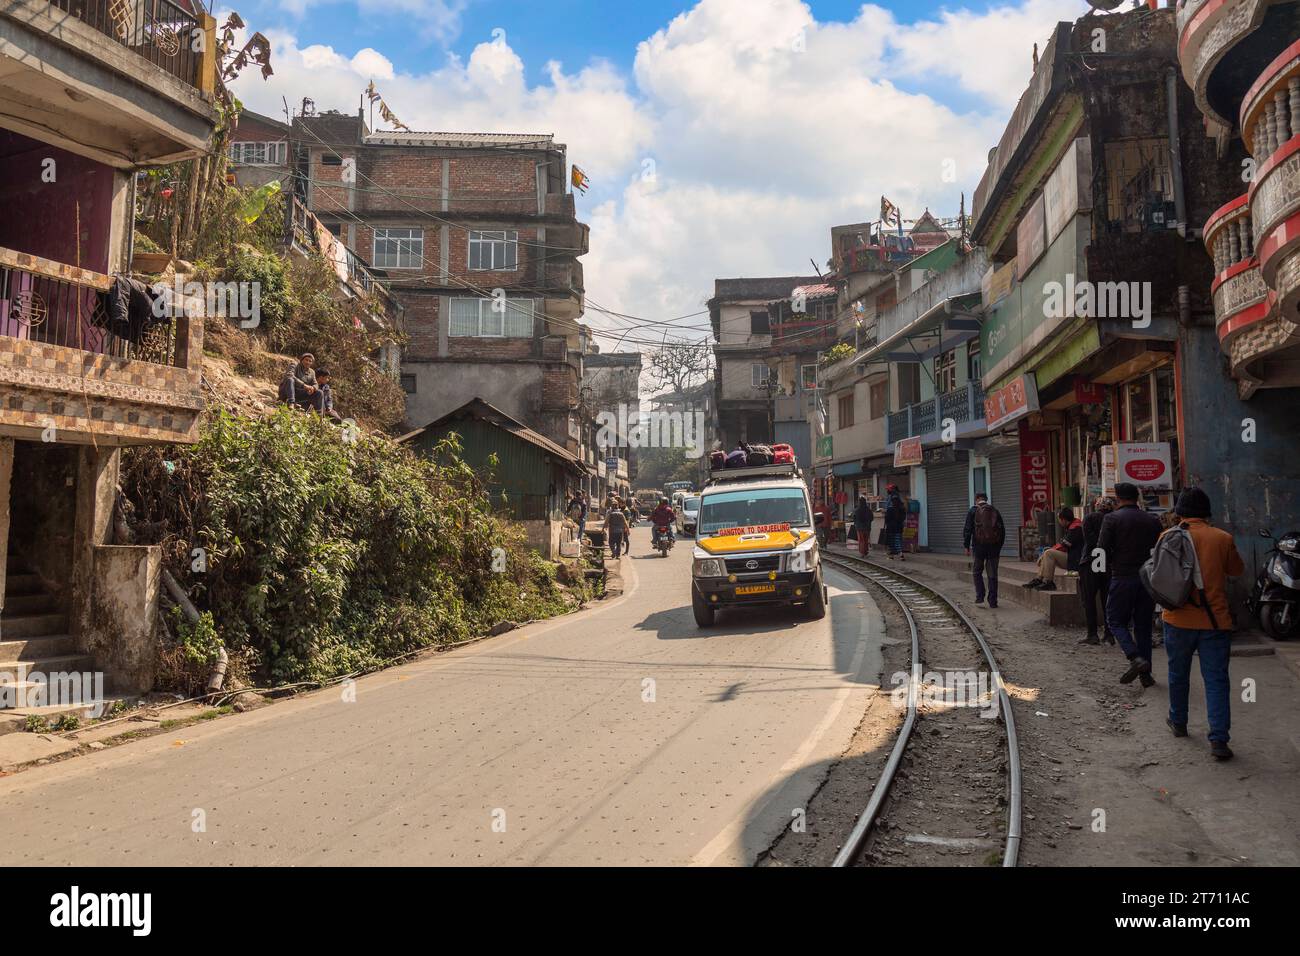 Darjeeling city road with toy train tracks, shops, and tourists. Darjeeling is popular hill station in the state of West Bengal, India. Stock Photo